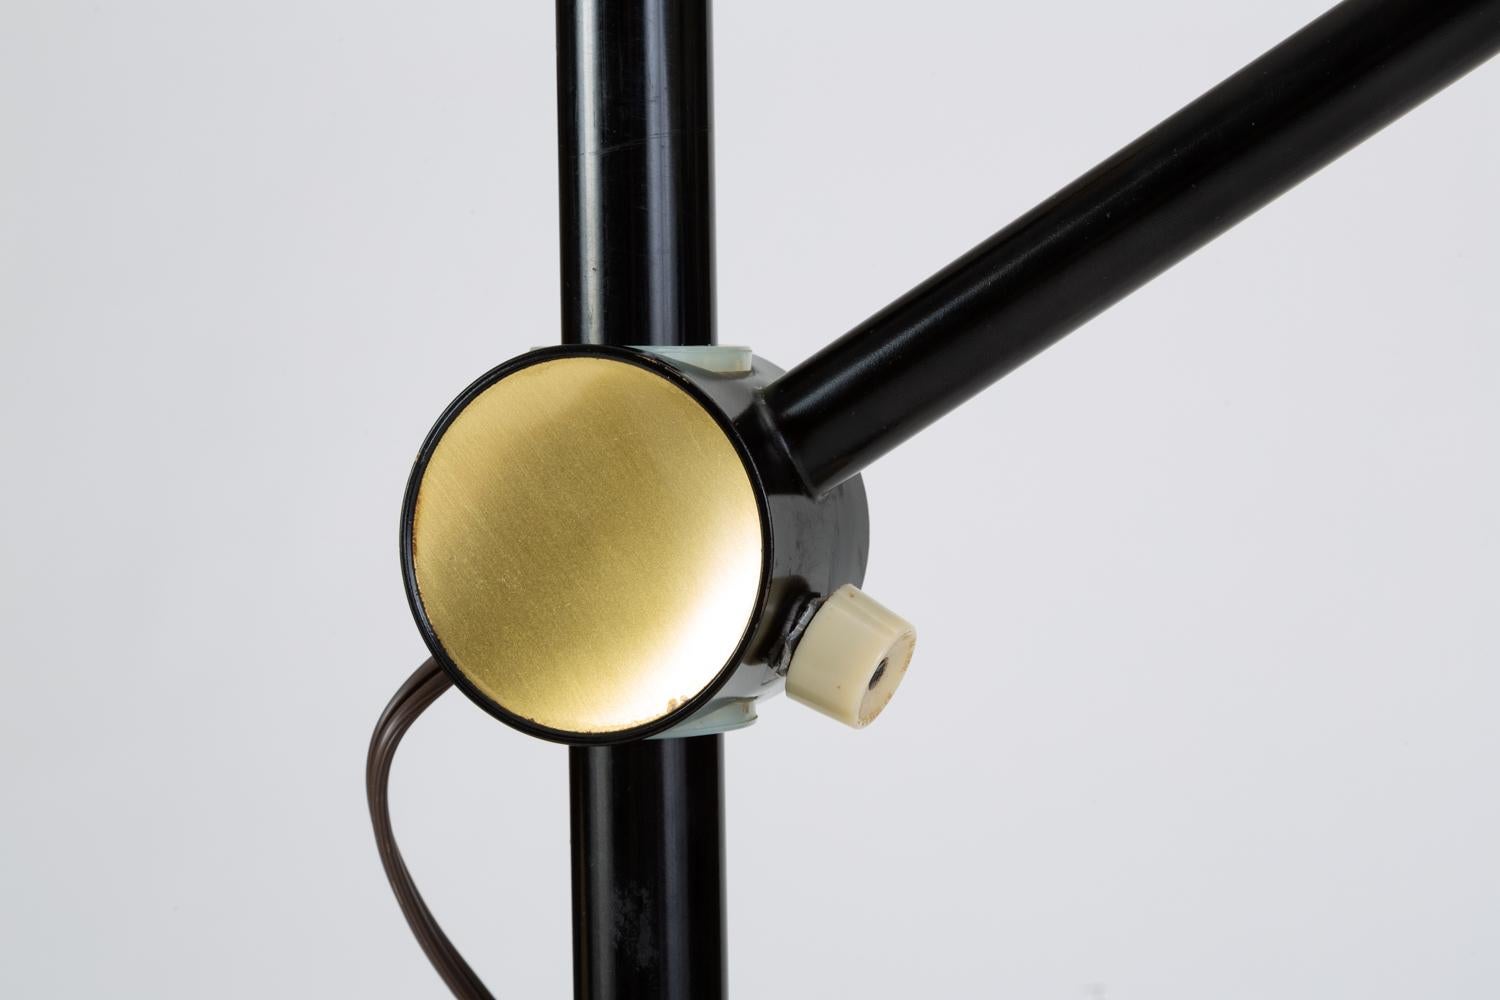 Black-Enameled Desk Lamp with Brass Accents by Dazor 5